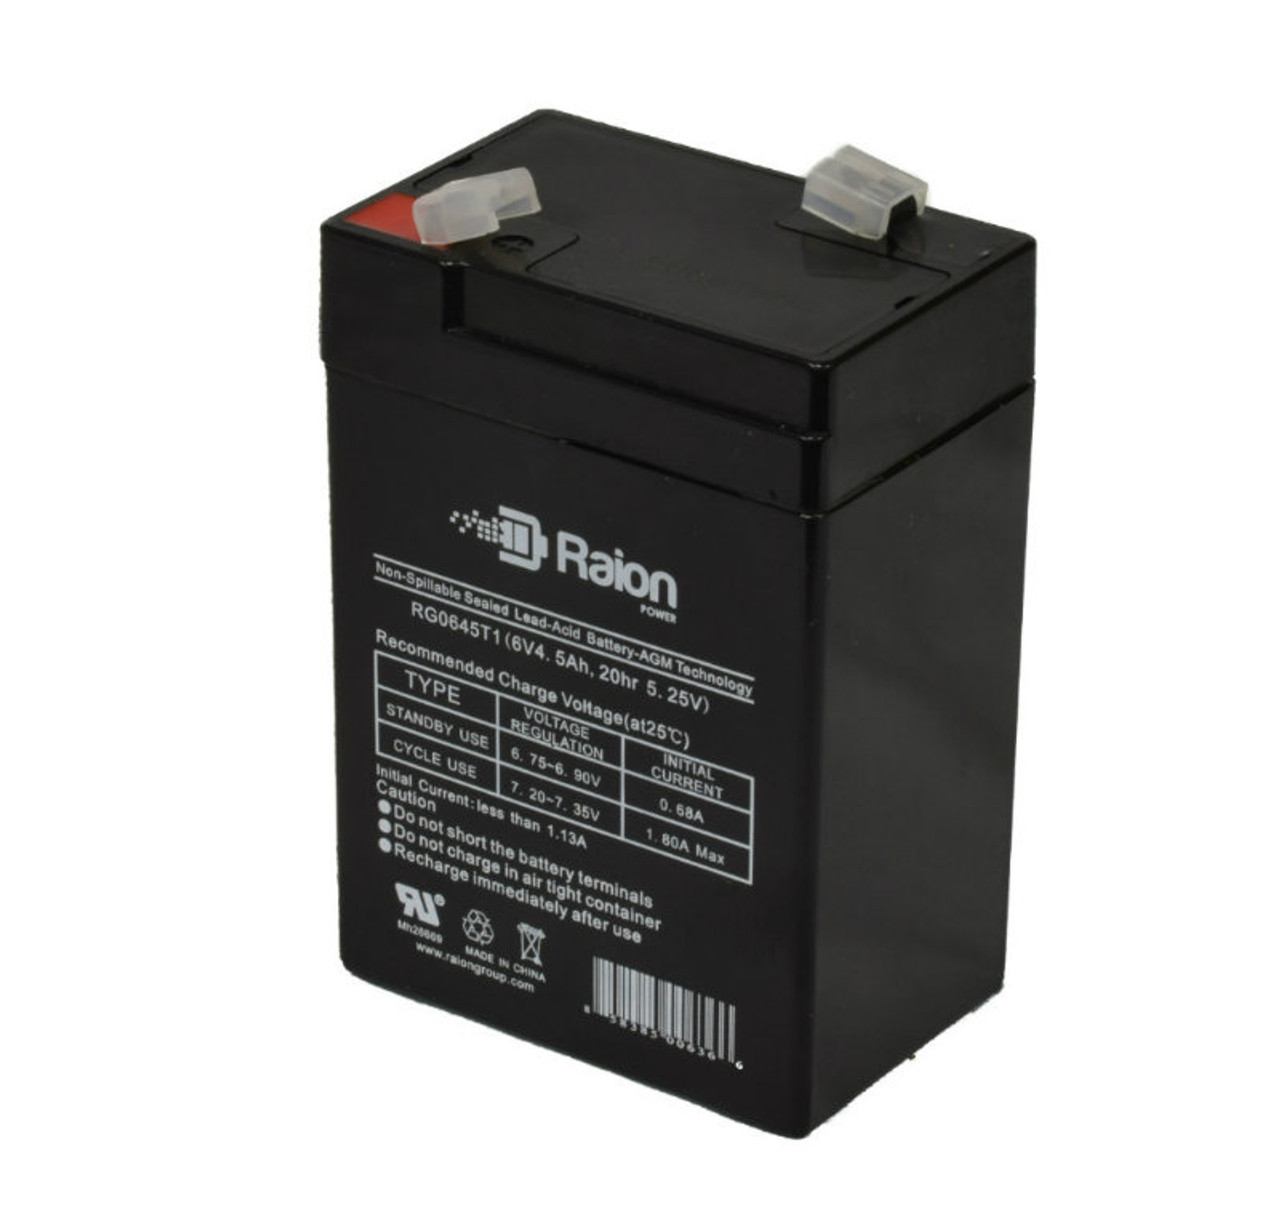 Raion Power RG0645T1 6V 4.5Ah Replacement Battery Cartridge for EverExceed AM6-4.0